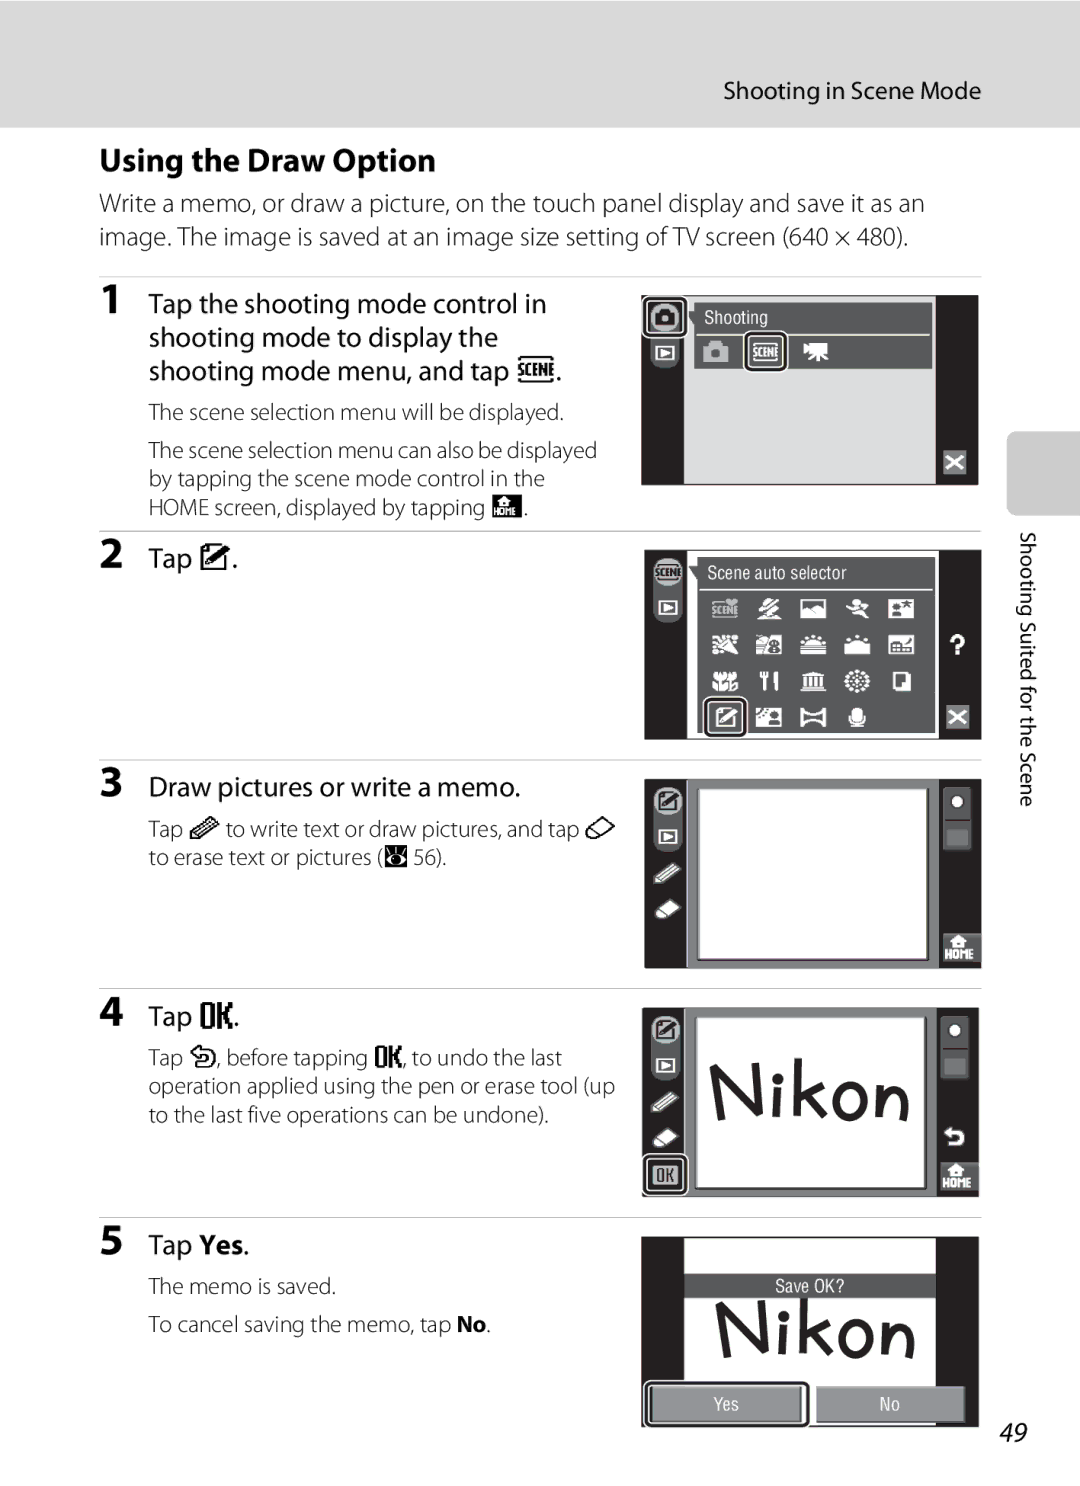 Nikon COOLPIXS60PNK, COOLPIXS60RED, COOLPIXS60BK user manual Using the Draw Option, Draw pictures or write a memo, Tap e 